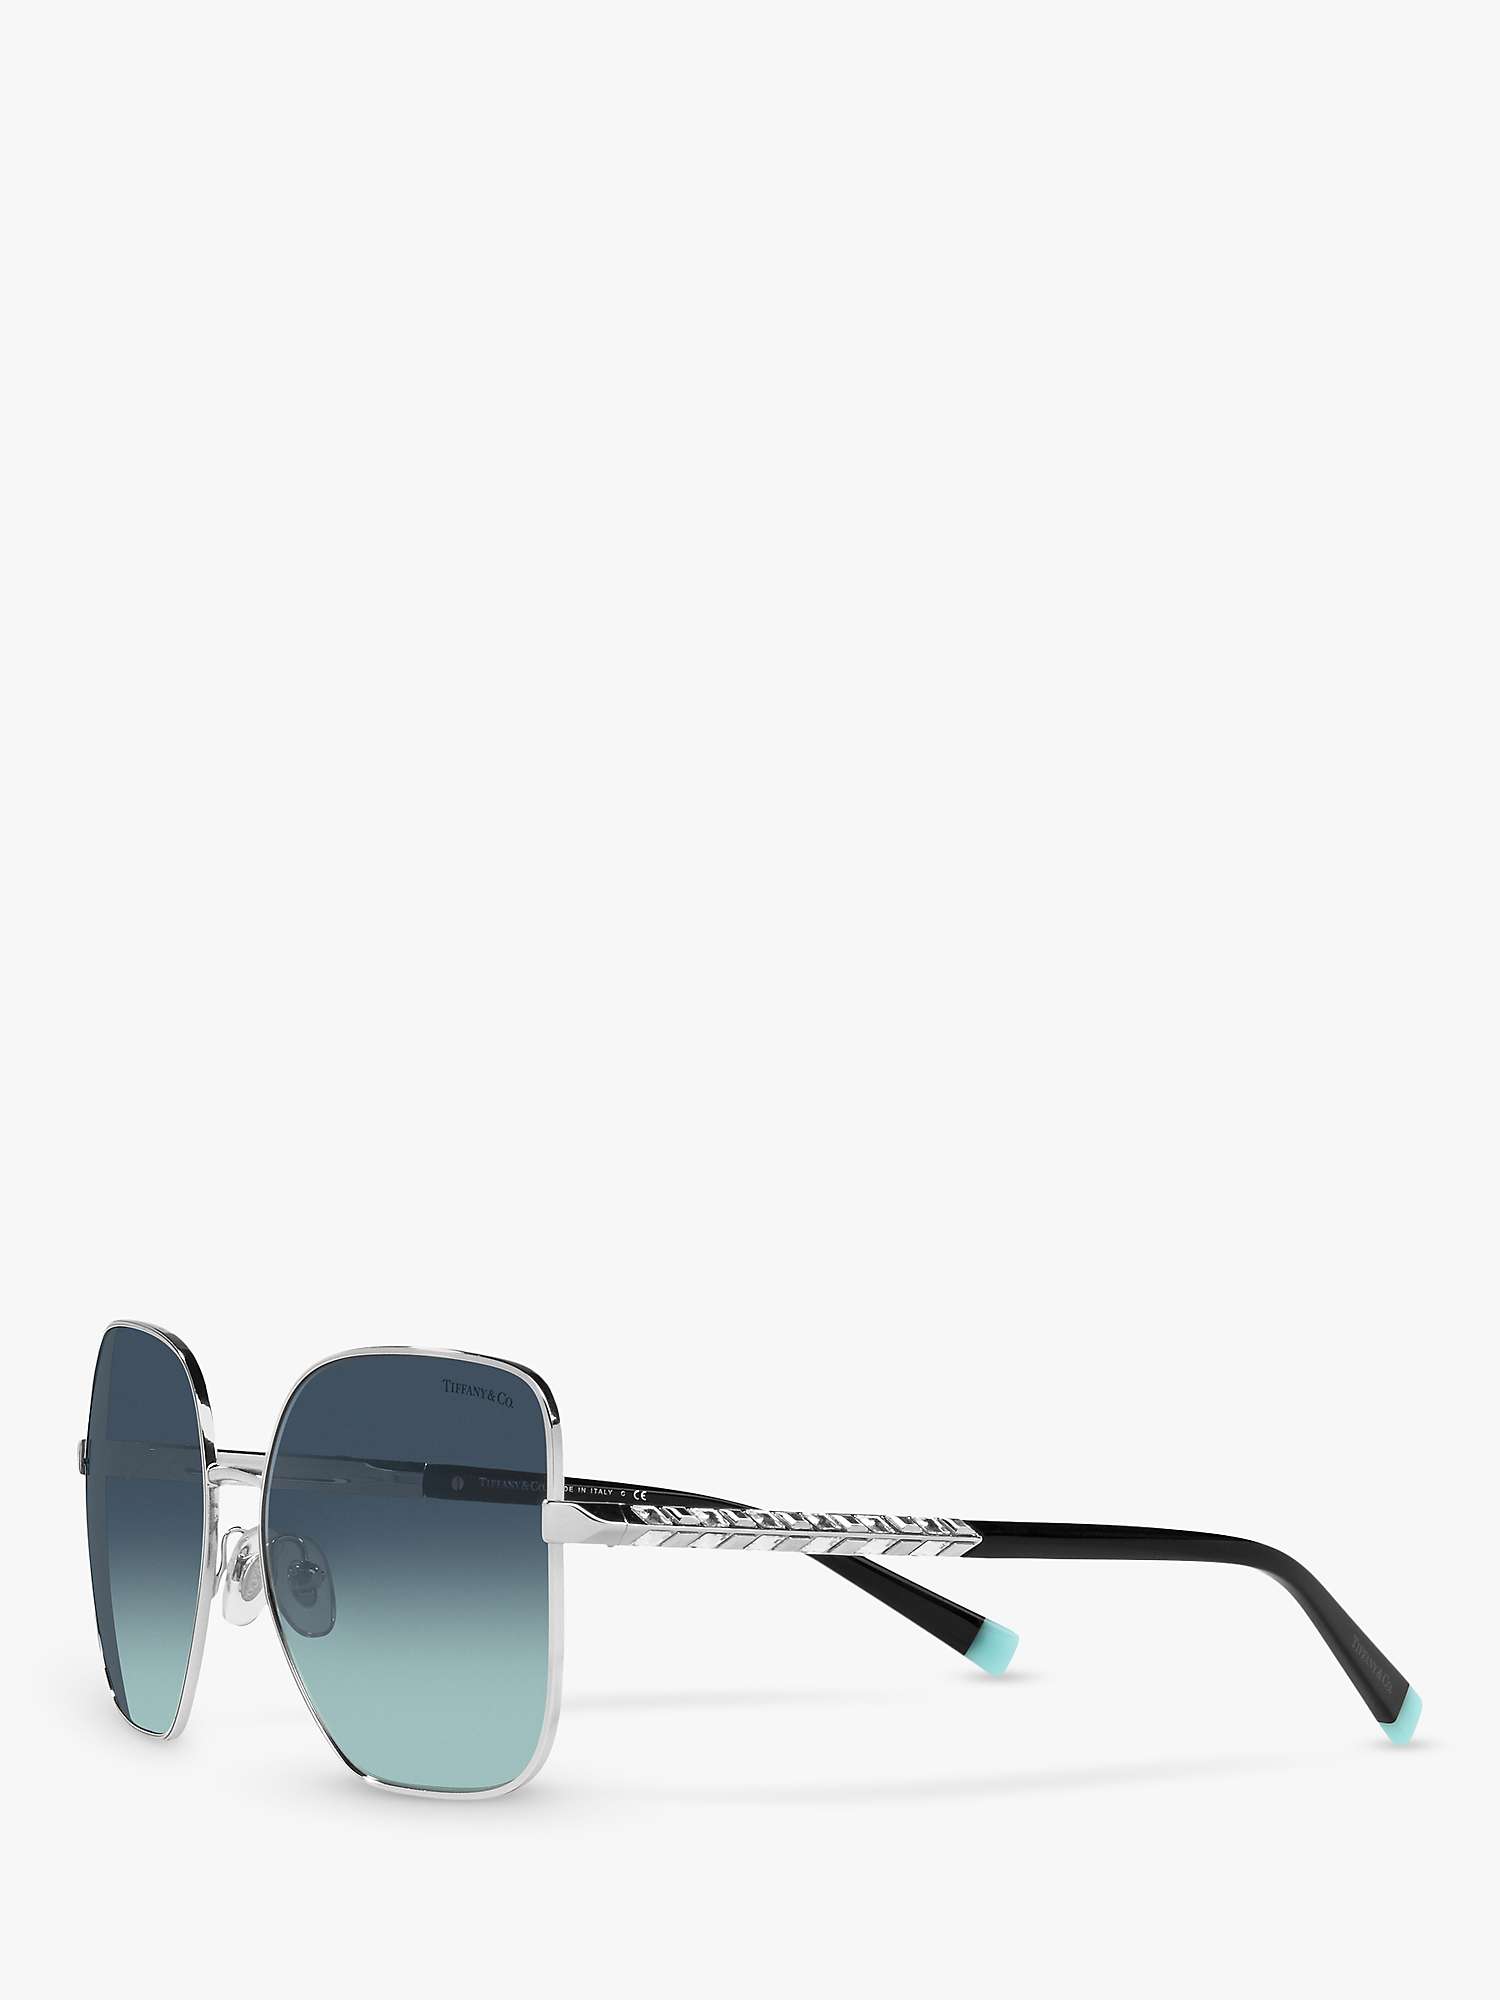 Buy Tiffany & Co TF3078 Women's Square Sunglasses, Silver/Blue Gradient Online at johnlewis.com